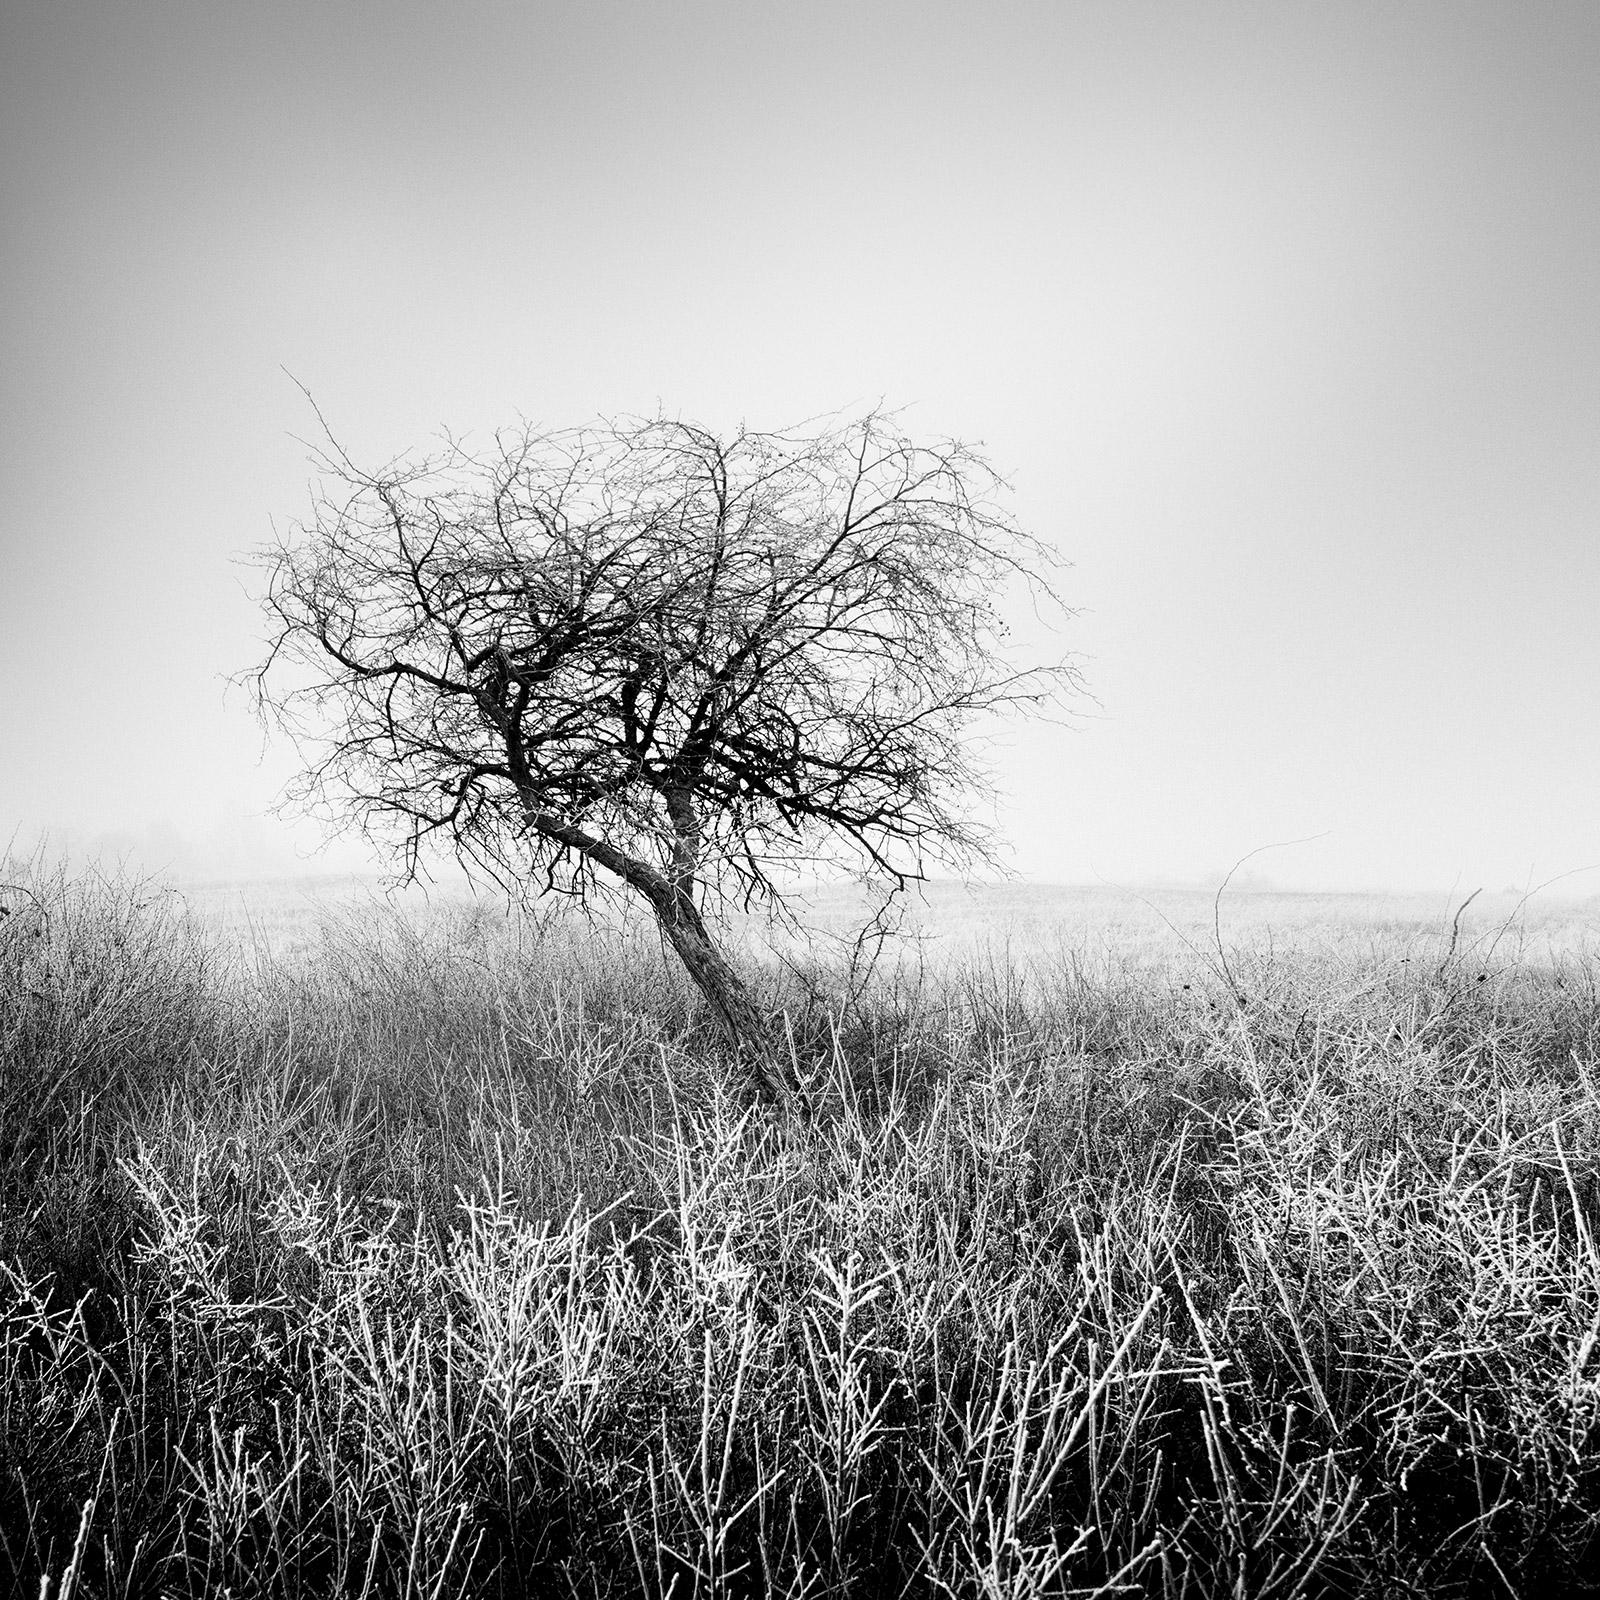 Gerald Berghammer Landscape Photograph - Tree in hoarfrost, frozen, Hungary, black and white art landscape photography 